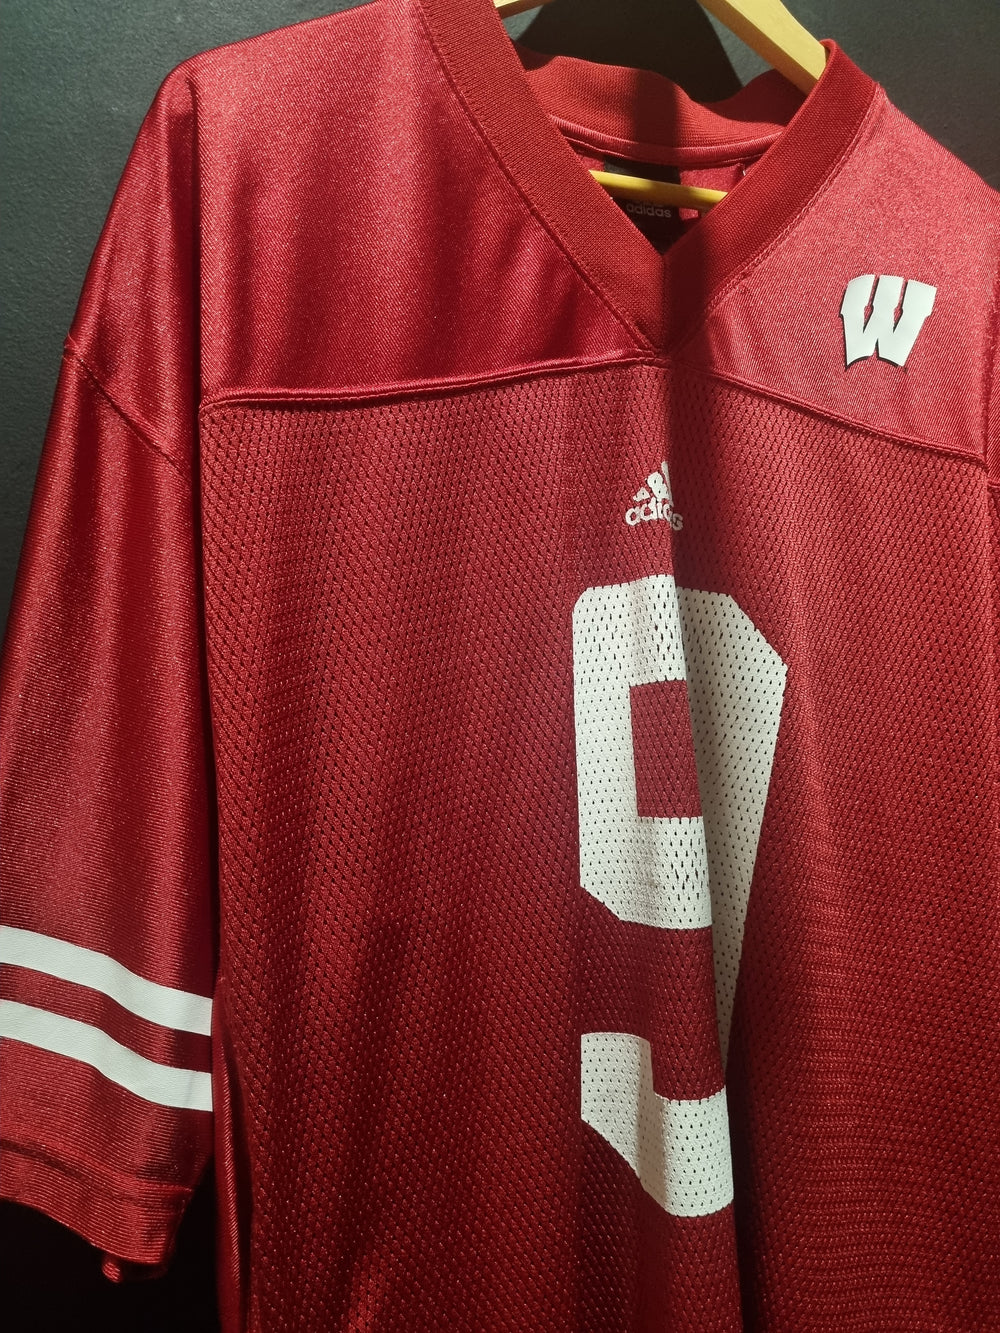 Wisconsin Badgers College Football Adidas Large